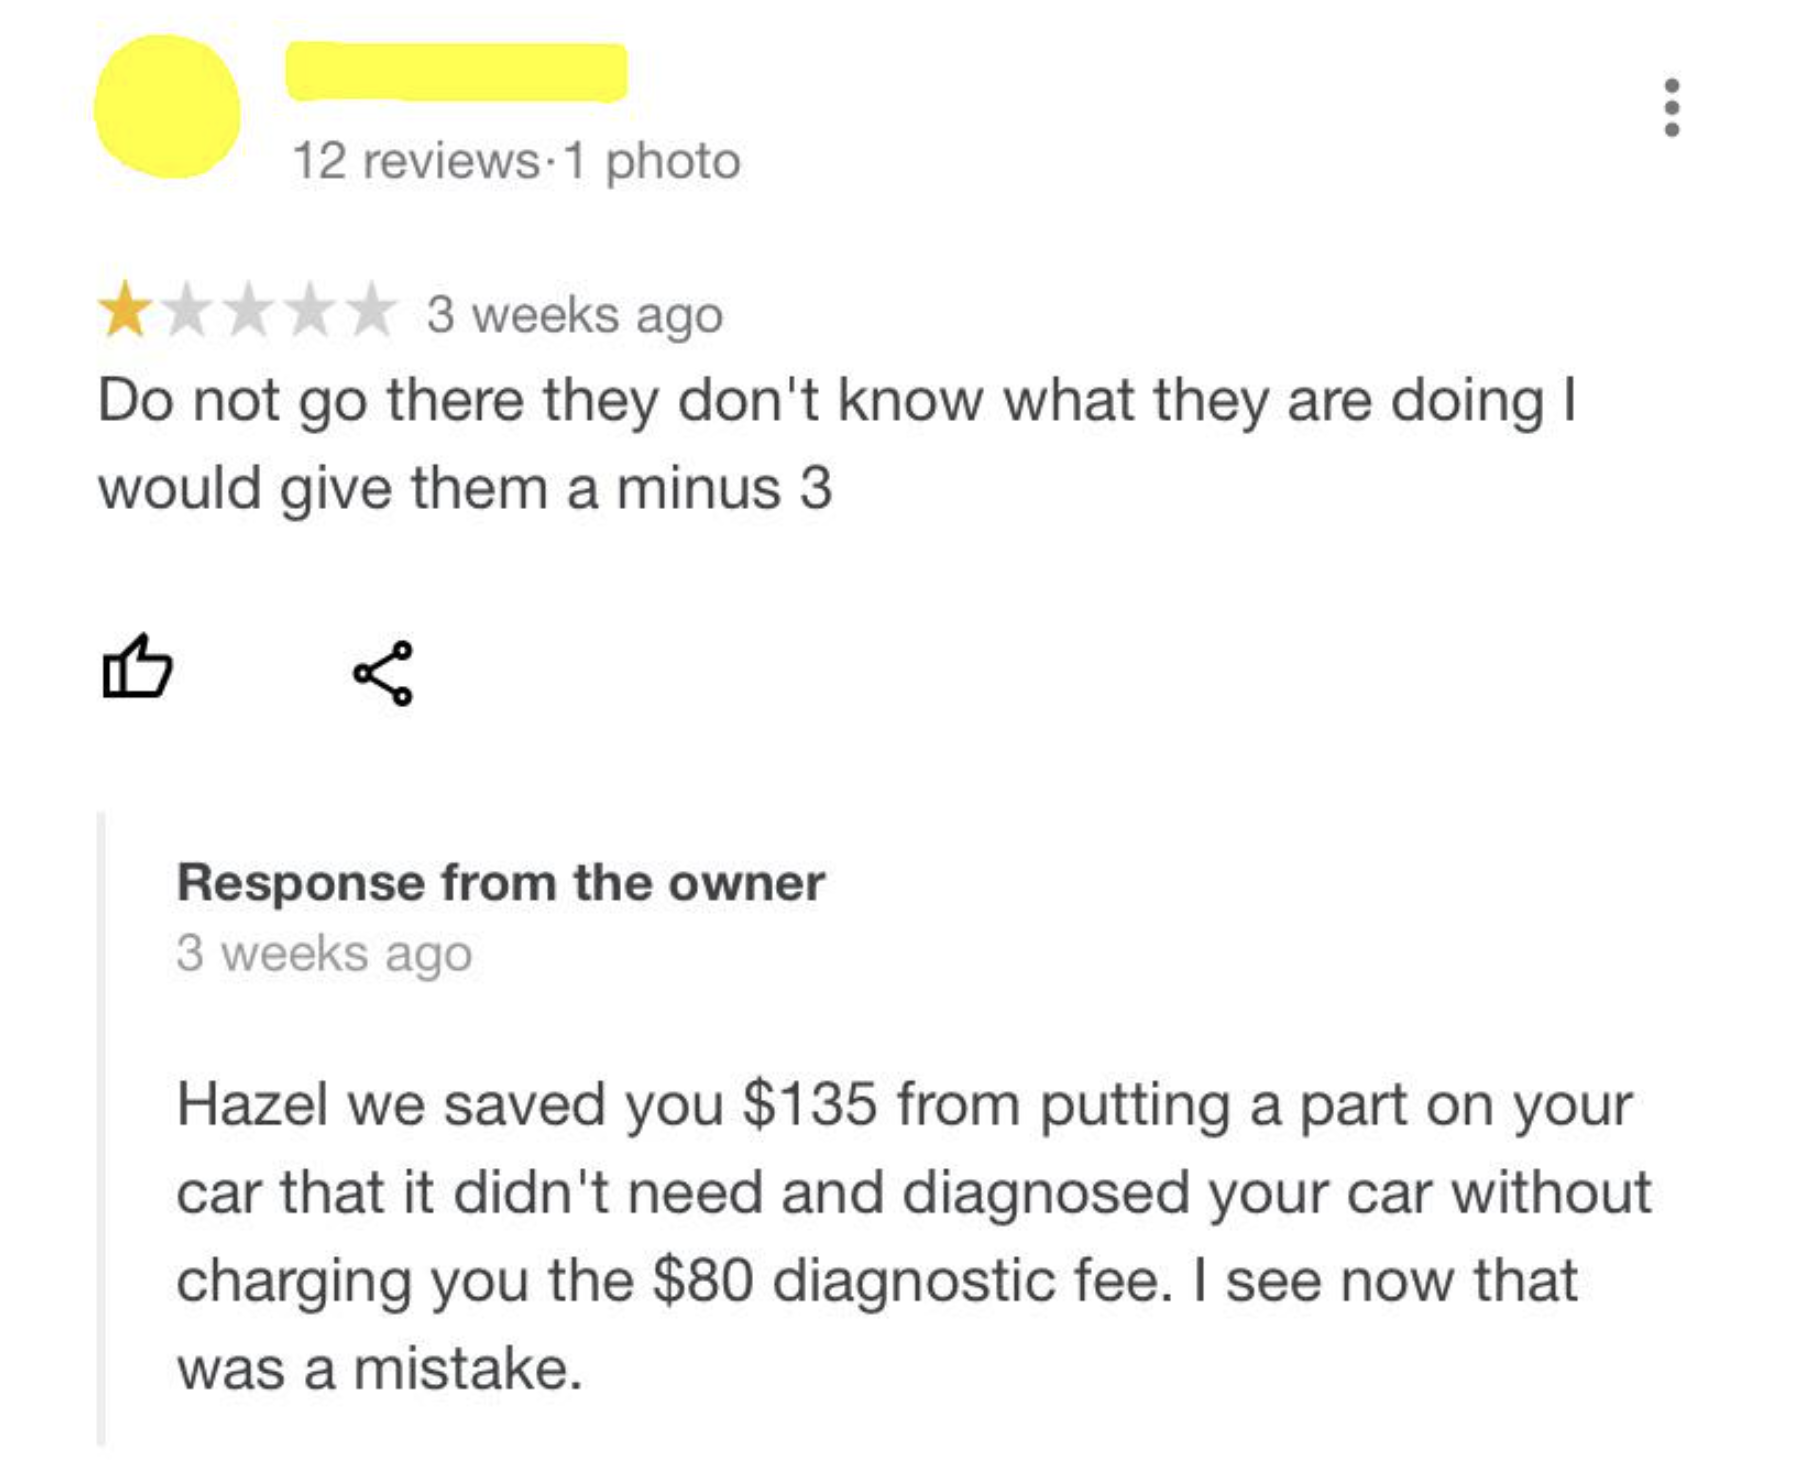 document - 12 reviews 1 photo 3 weeks ago Do not go there they don't know what they are doing I would give them a minus 3 11 Response from the owner 3 weeks ago Hazel we saved you $135 from putting a part on your car that it didn't need and diagnosed your